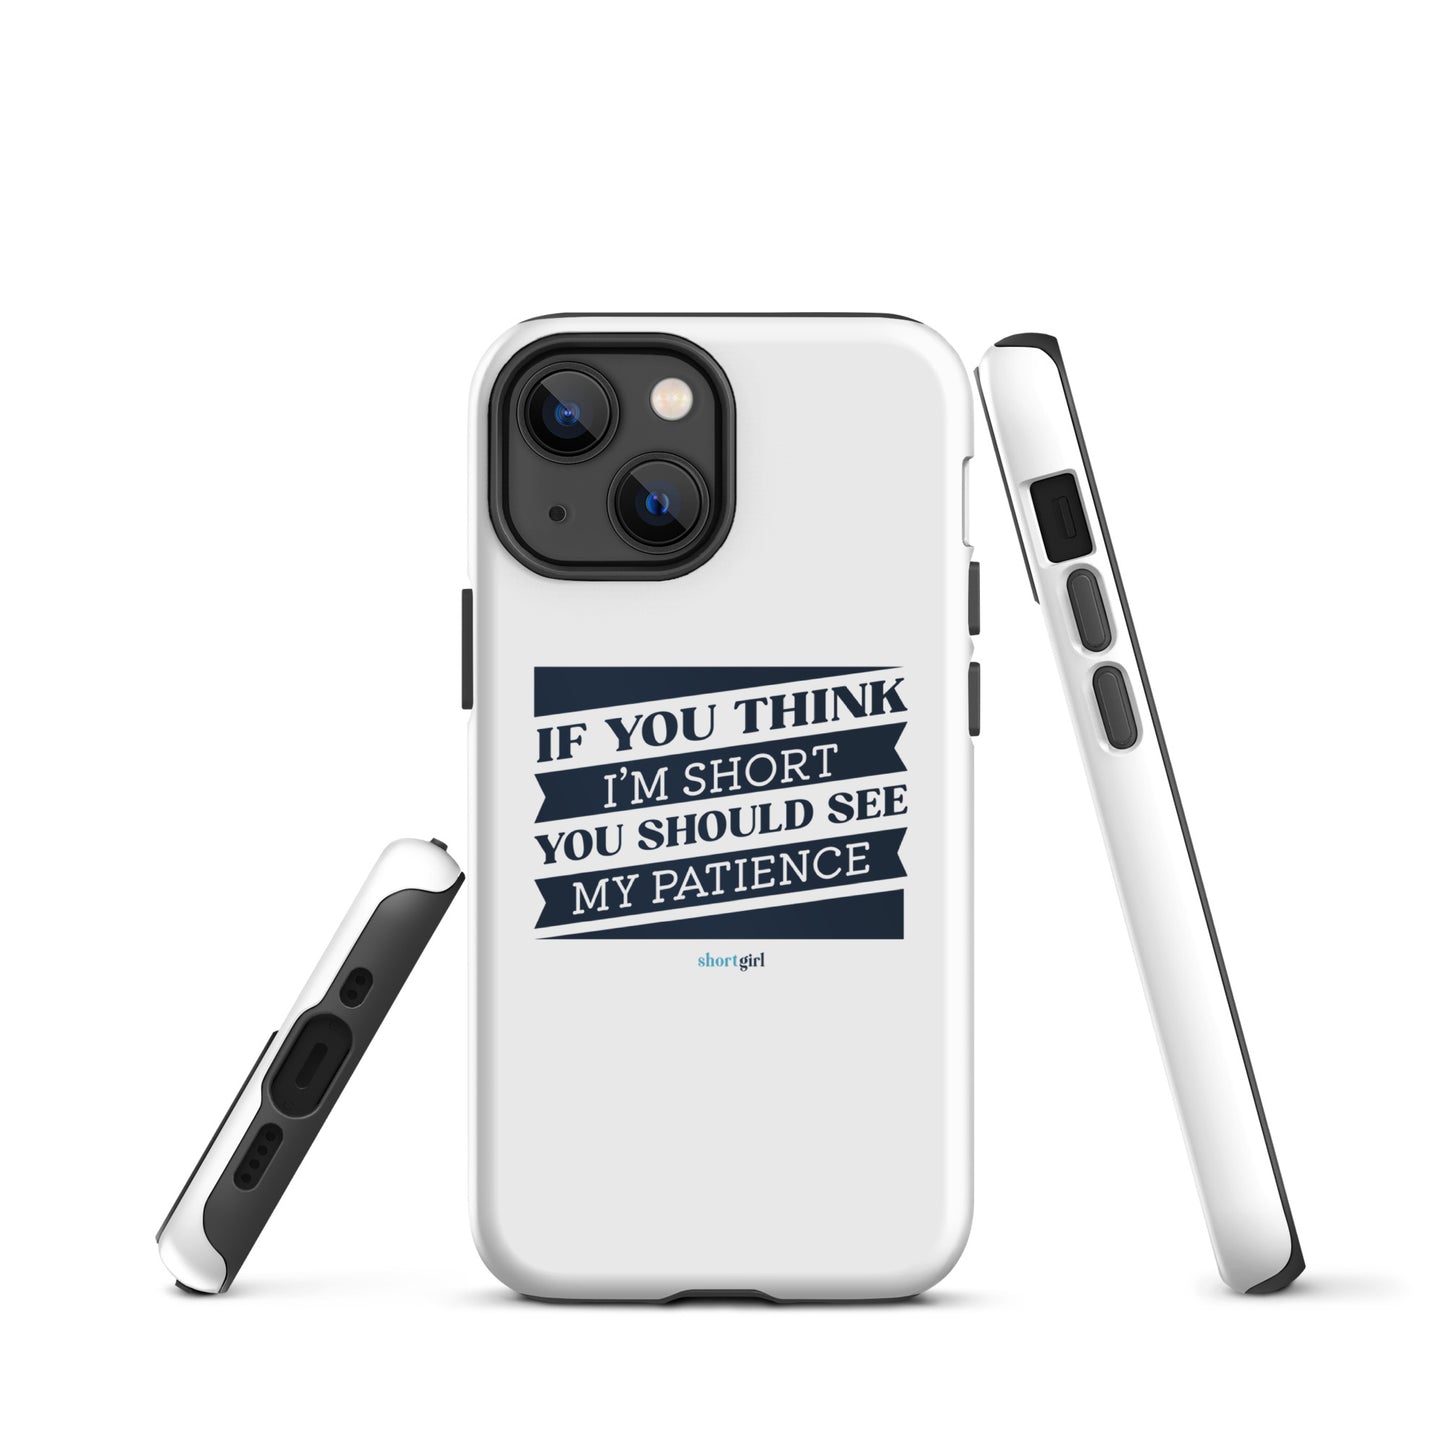 Tough iPhone case - If you think I'm short, you should see my patience